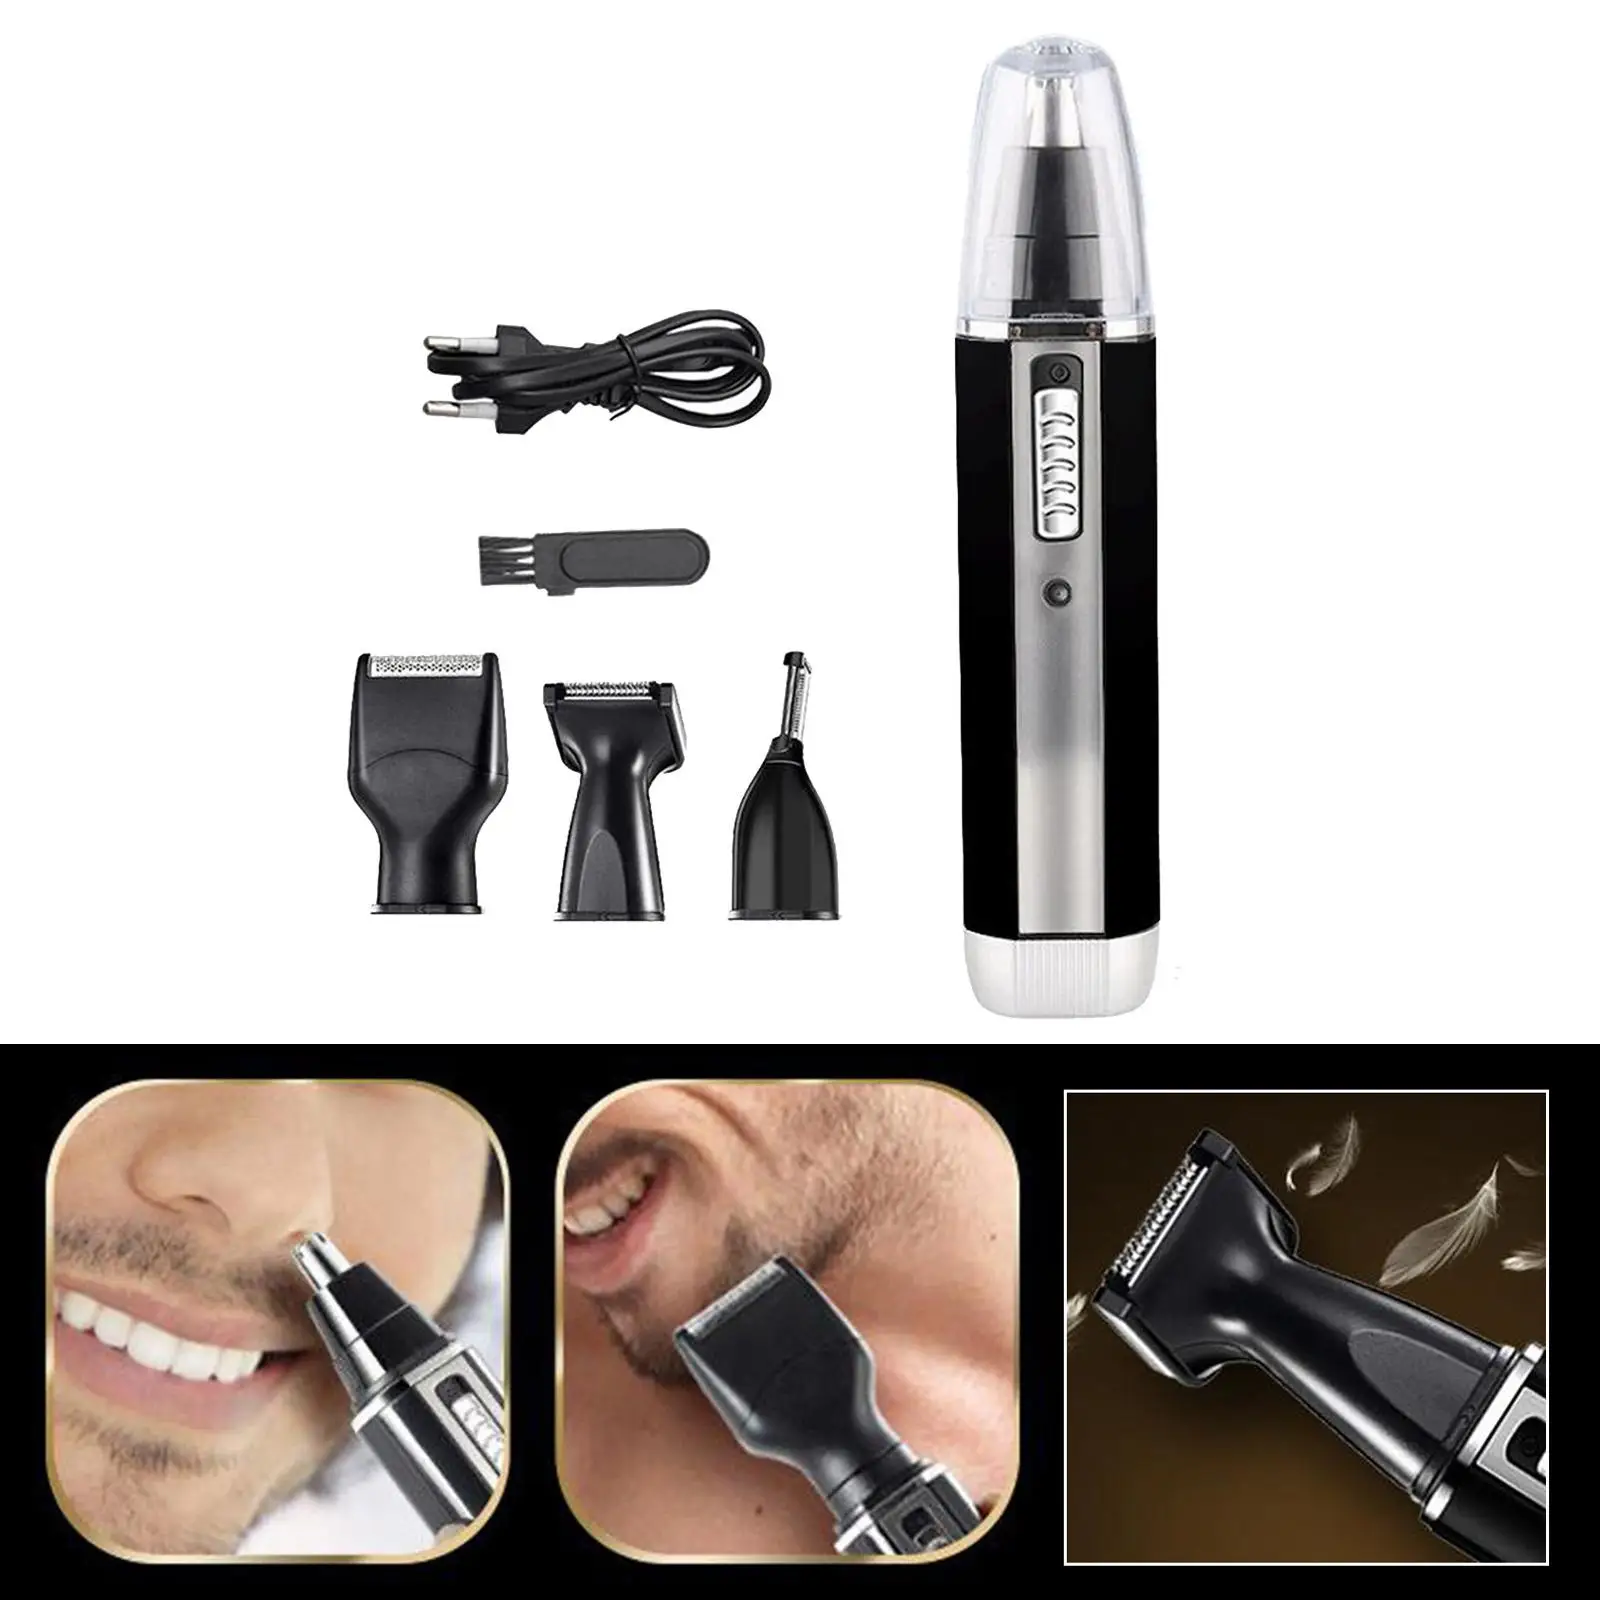 Professional 4 in 1 Travel Body Nose Ear Hair Trimmer Shaver Groomer Removal